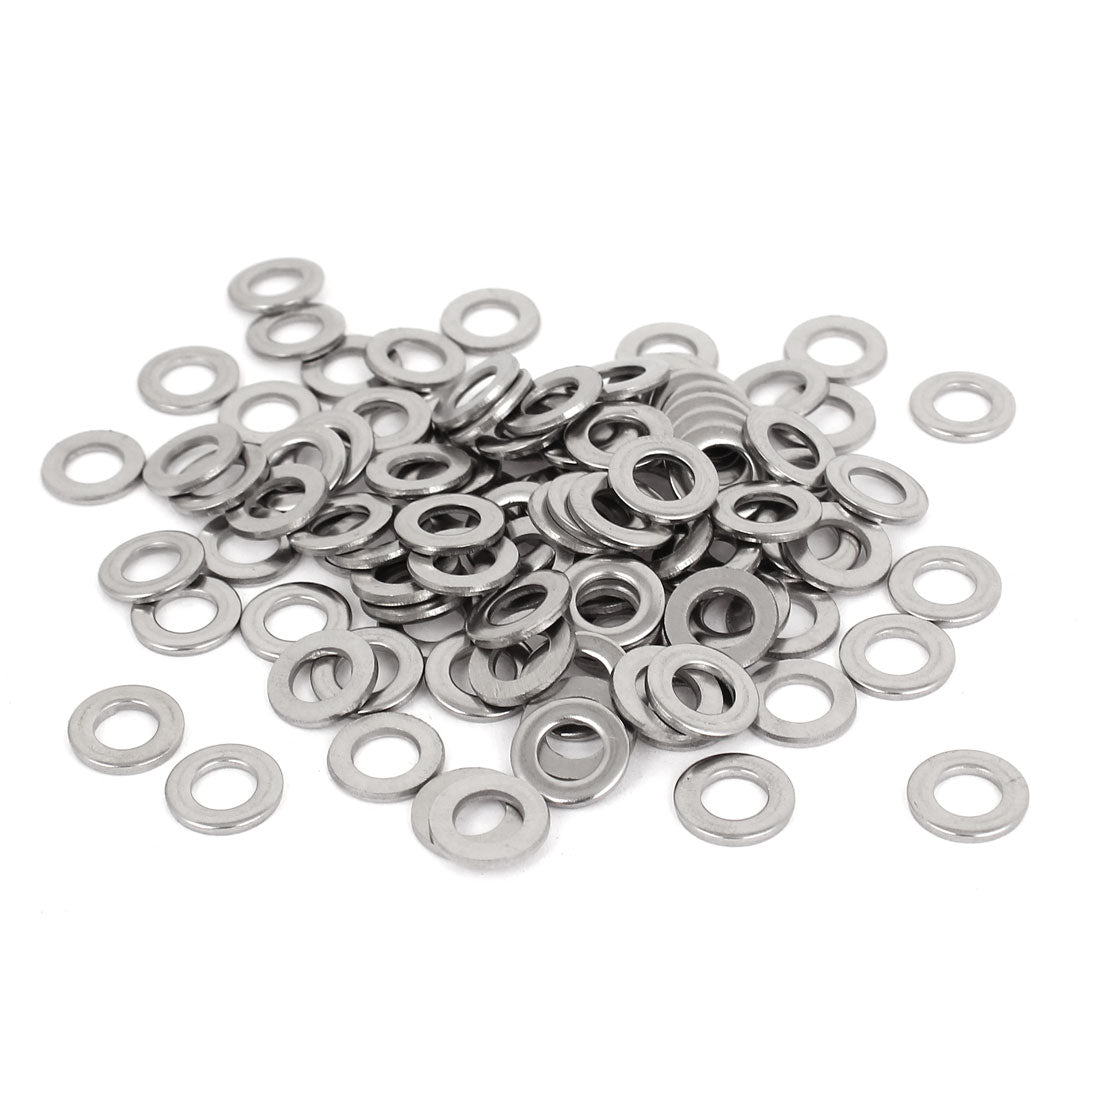 uxcell Uxcell 100pcs Silver Tone 304 Stainless Steel Flat Washer 1/4" for Screws Bolts